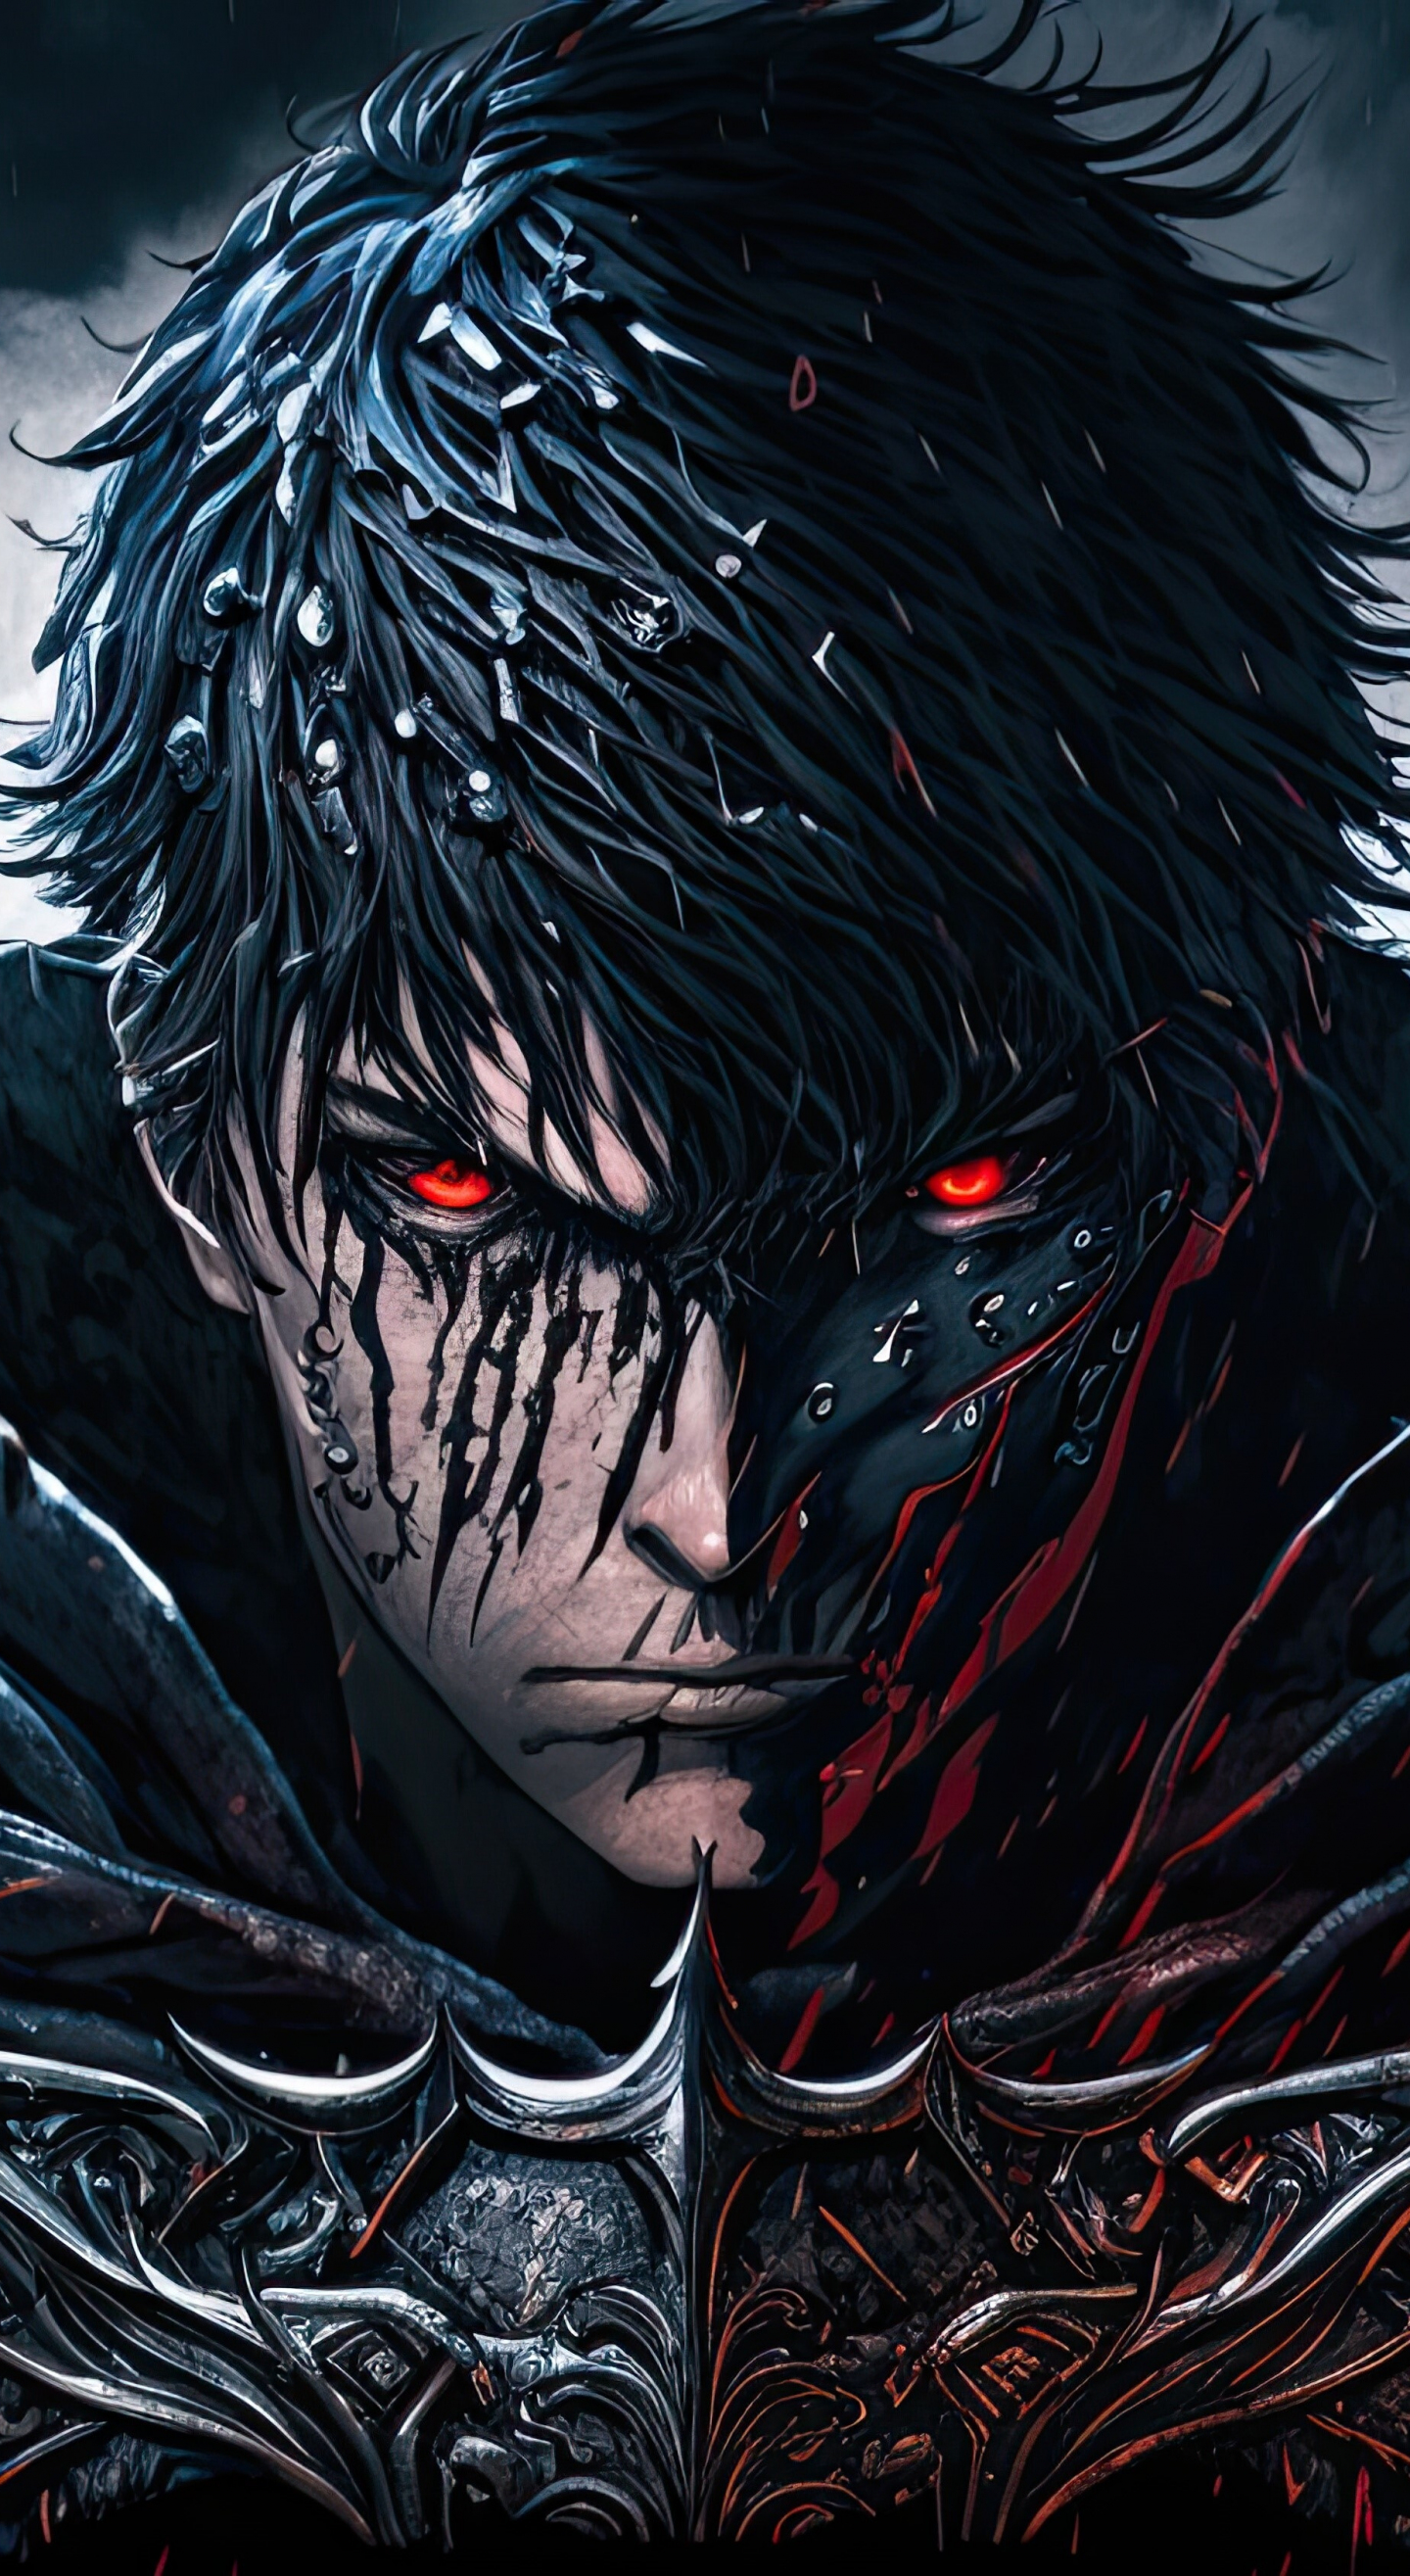 Berserk Chapter 374 Release Date and When Is It Coming Out